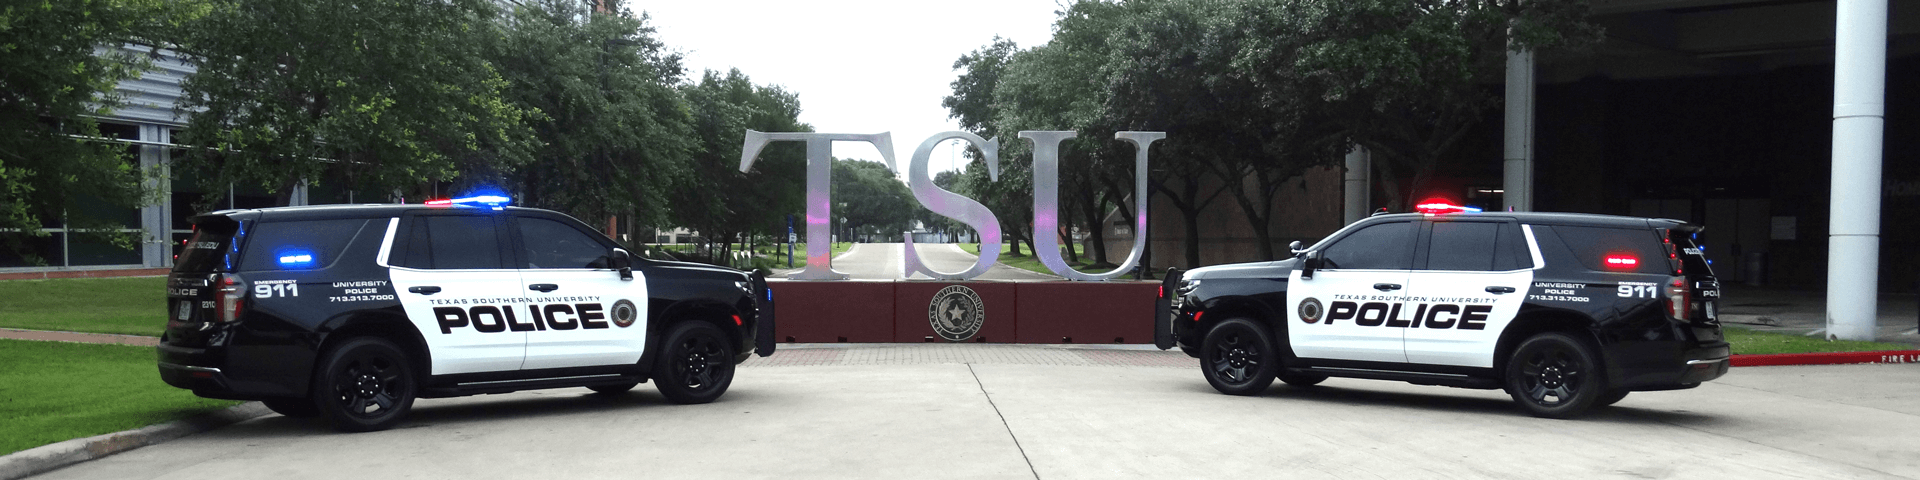 Texas Southern Police Vehicles